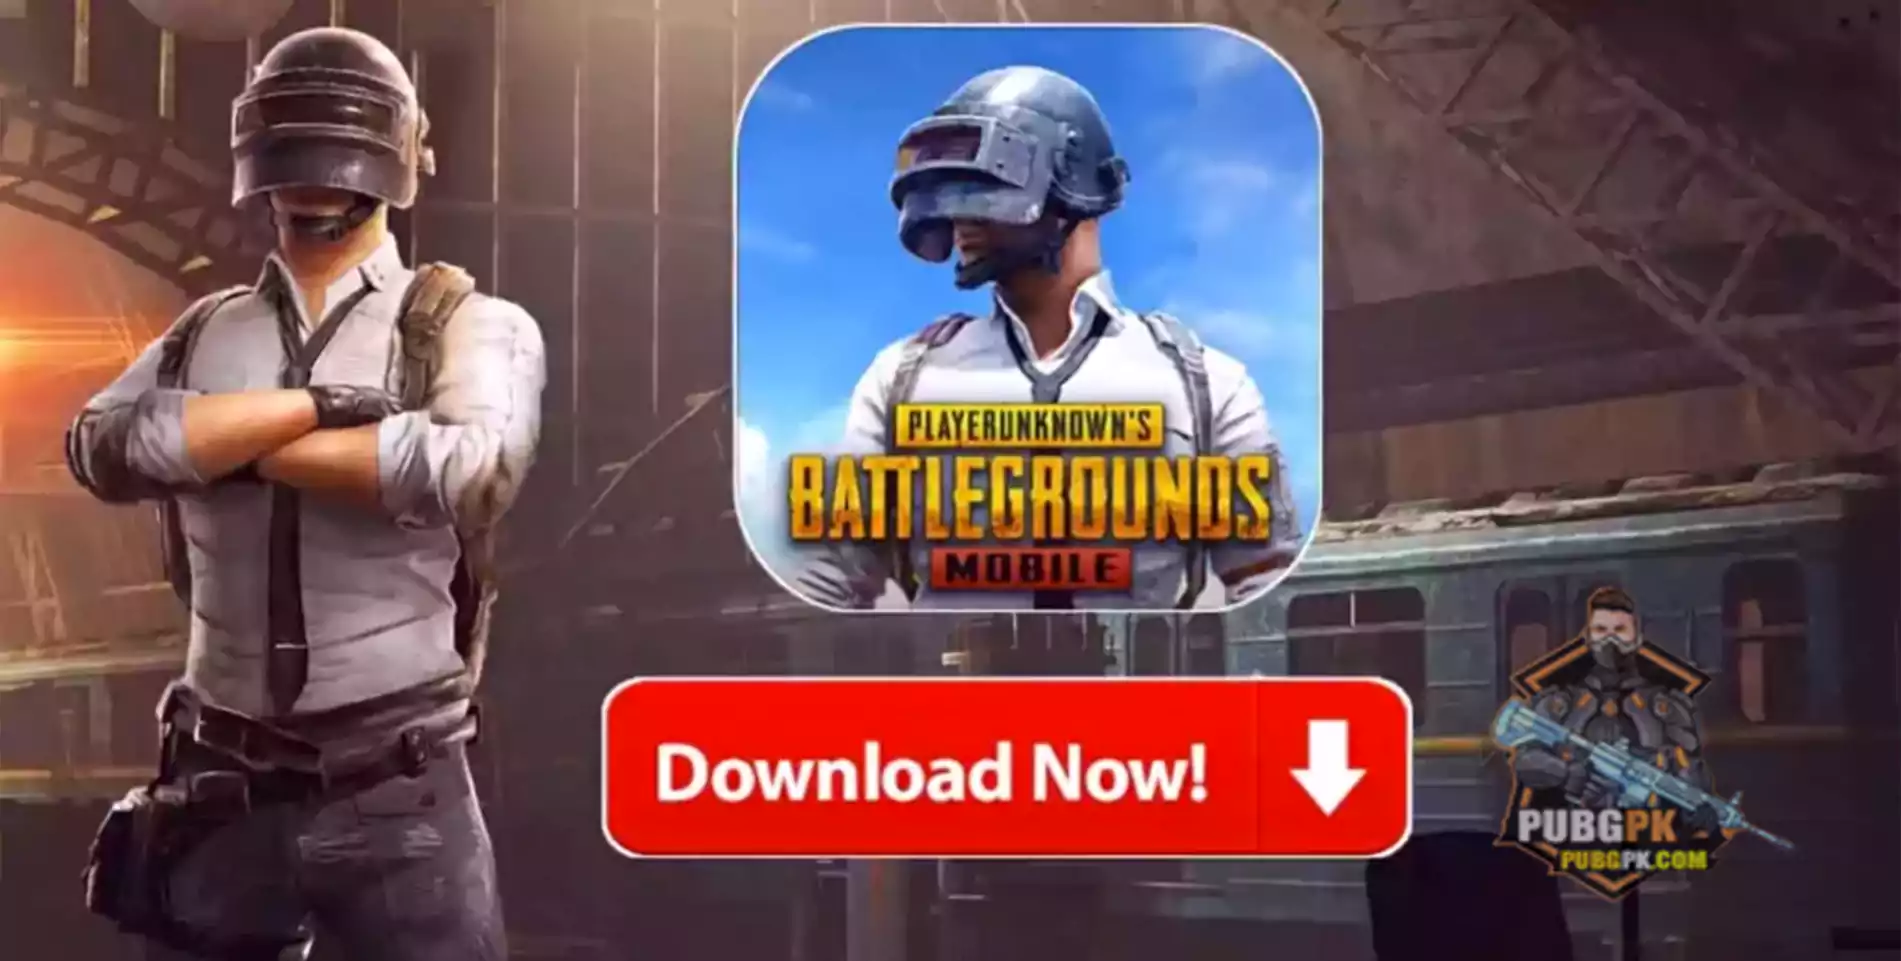 How to download PUBG Mobile 2.0 beta APK file on Android